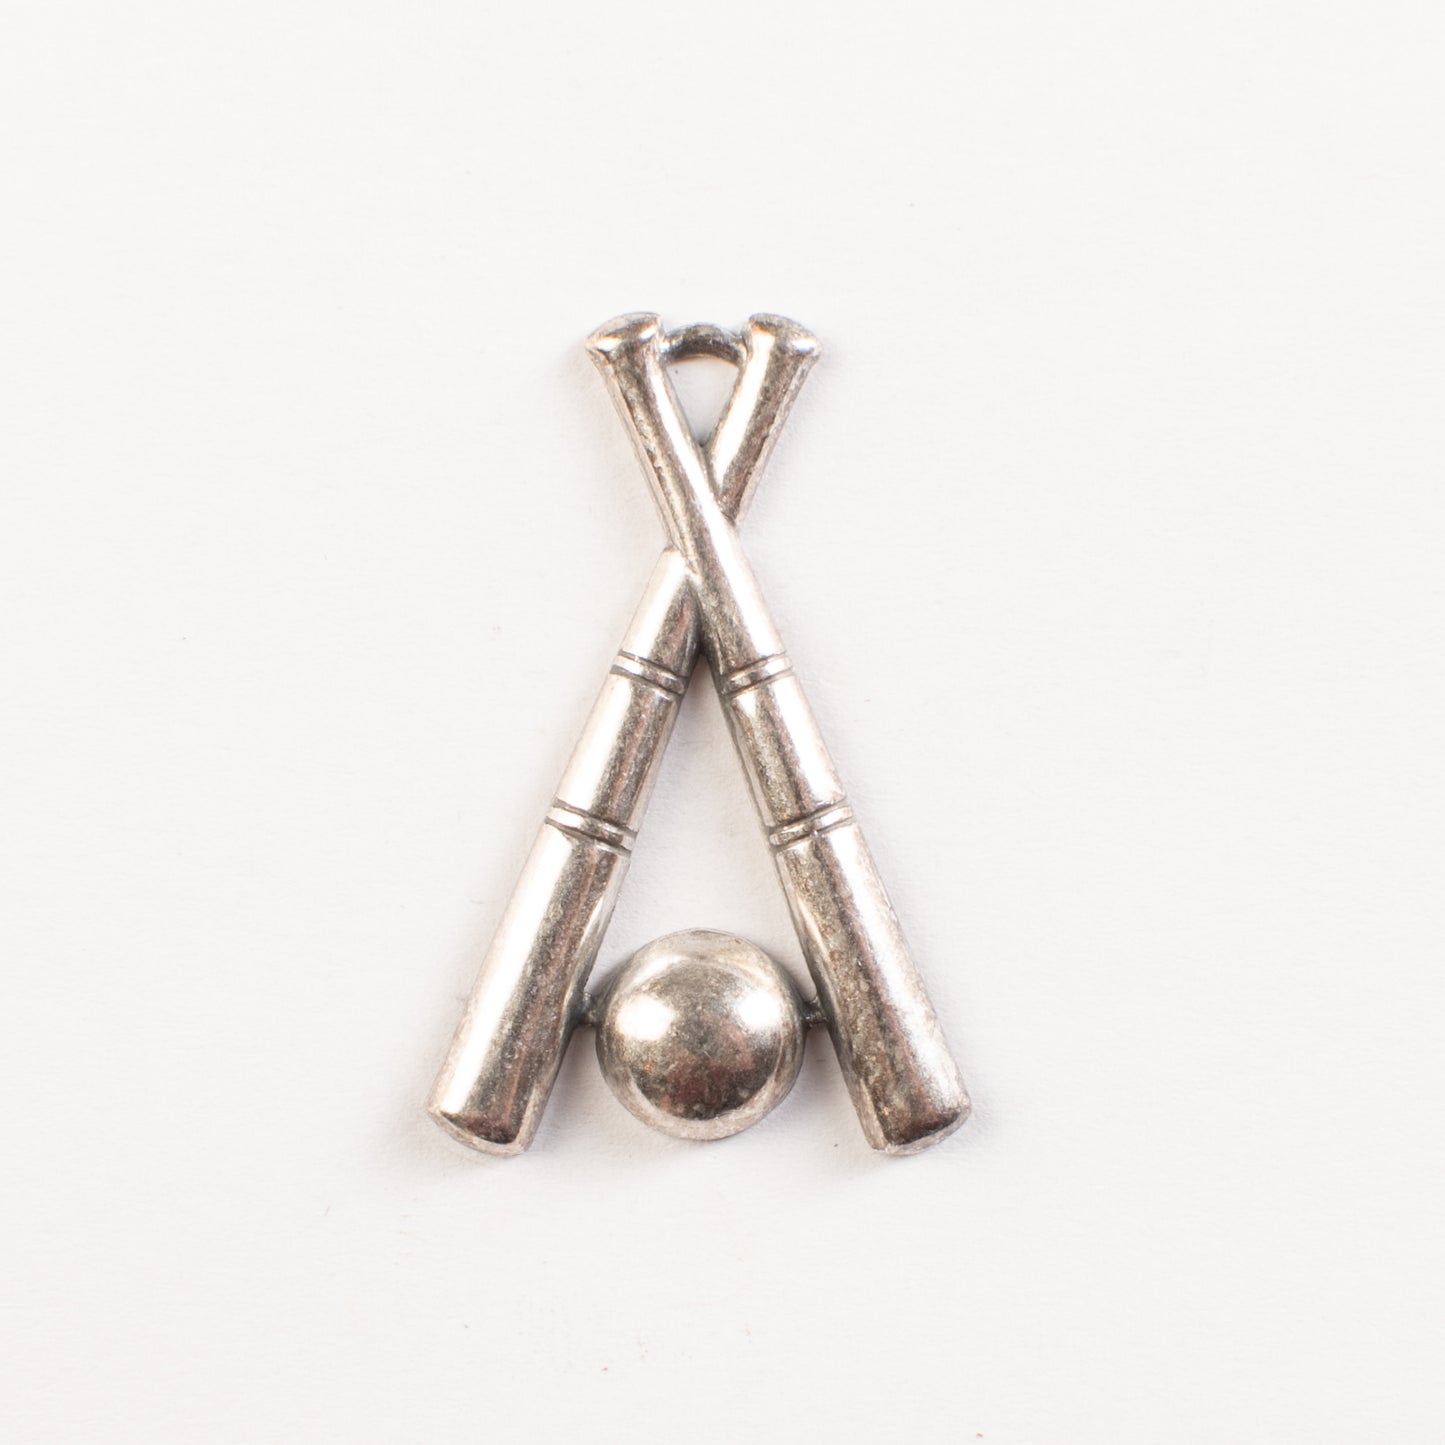 23x36mm Classic Silver Baseball Bats and Ball Charm, pack of 6